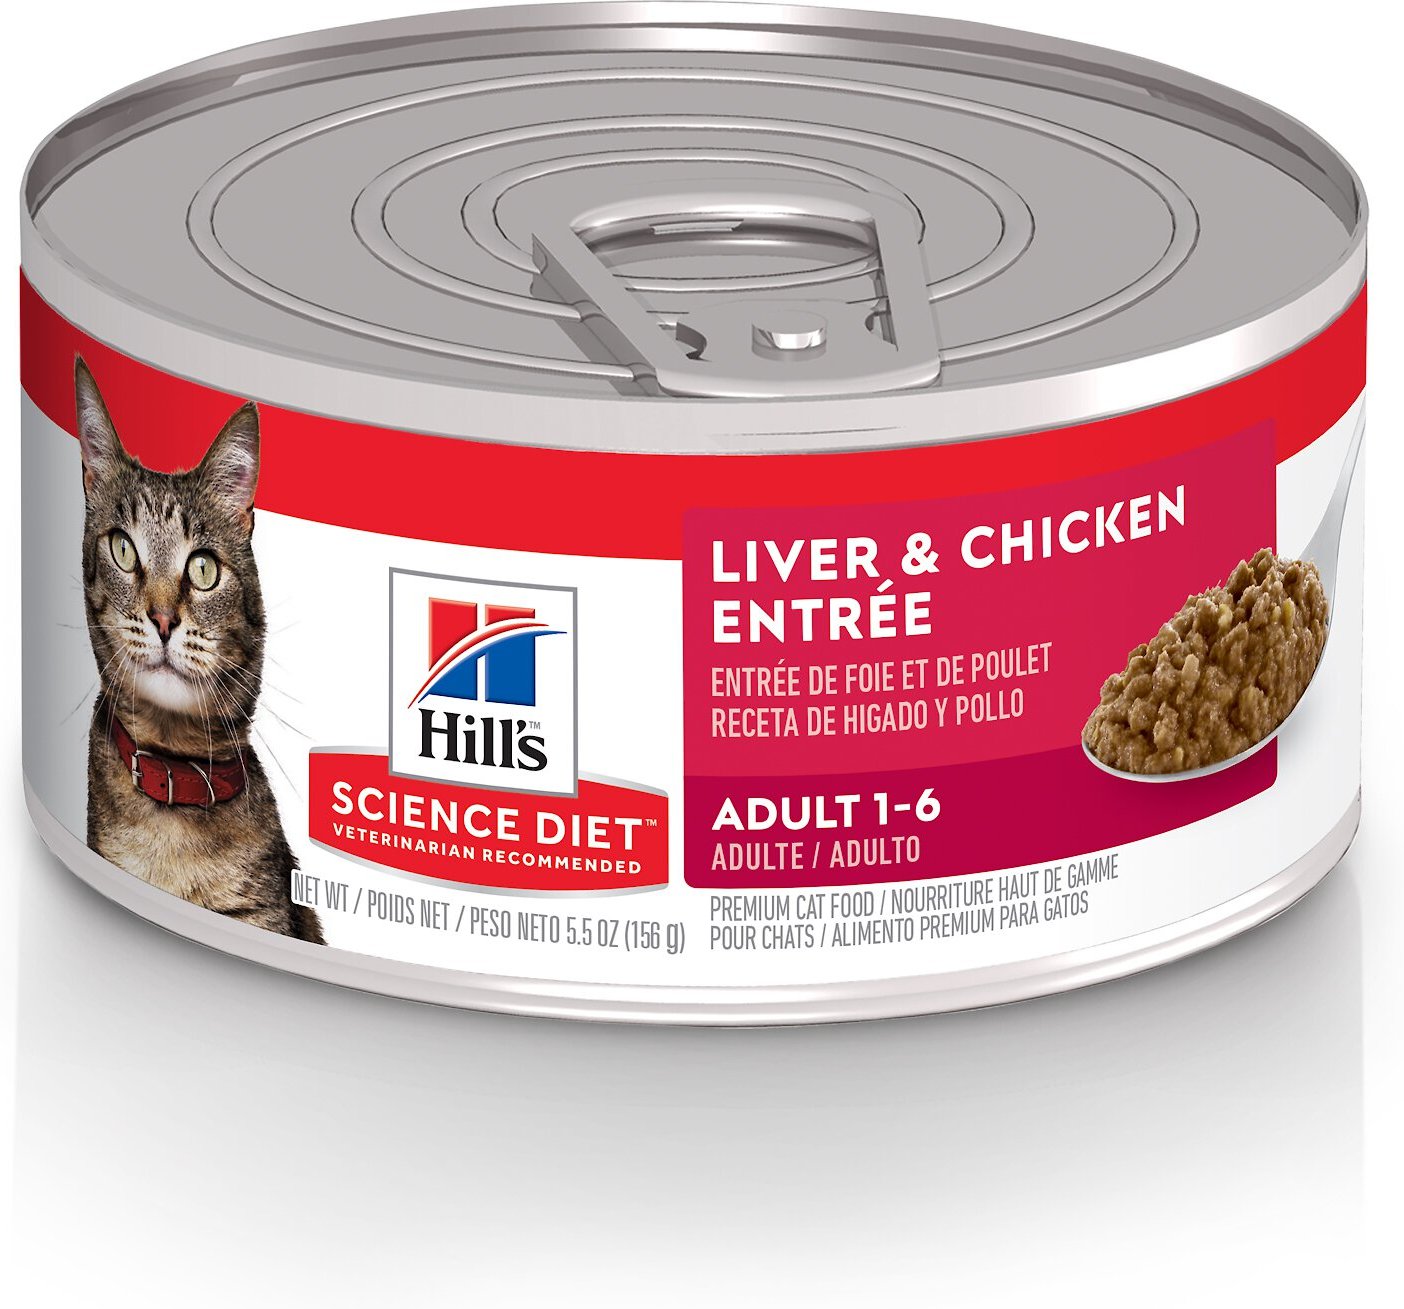 HILL'S SCIENCE DIET Adult Liver & Chicken Entree Canned Cat Food, 5.5